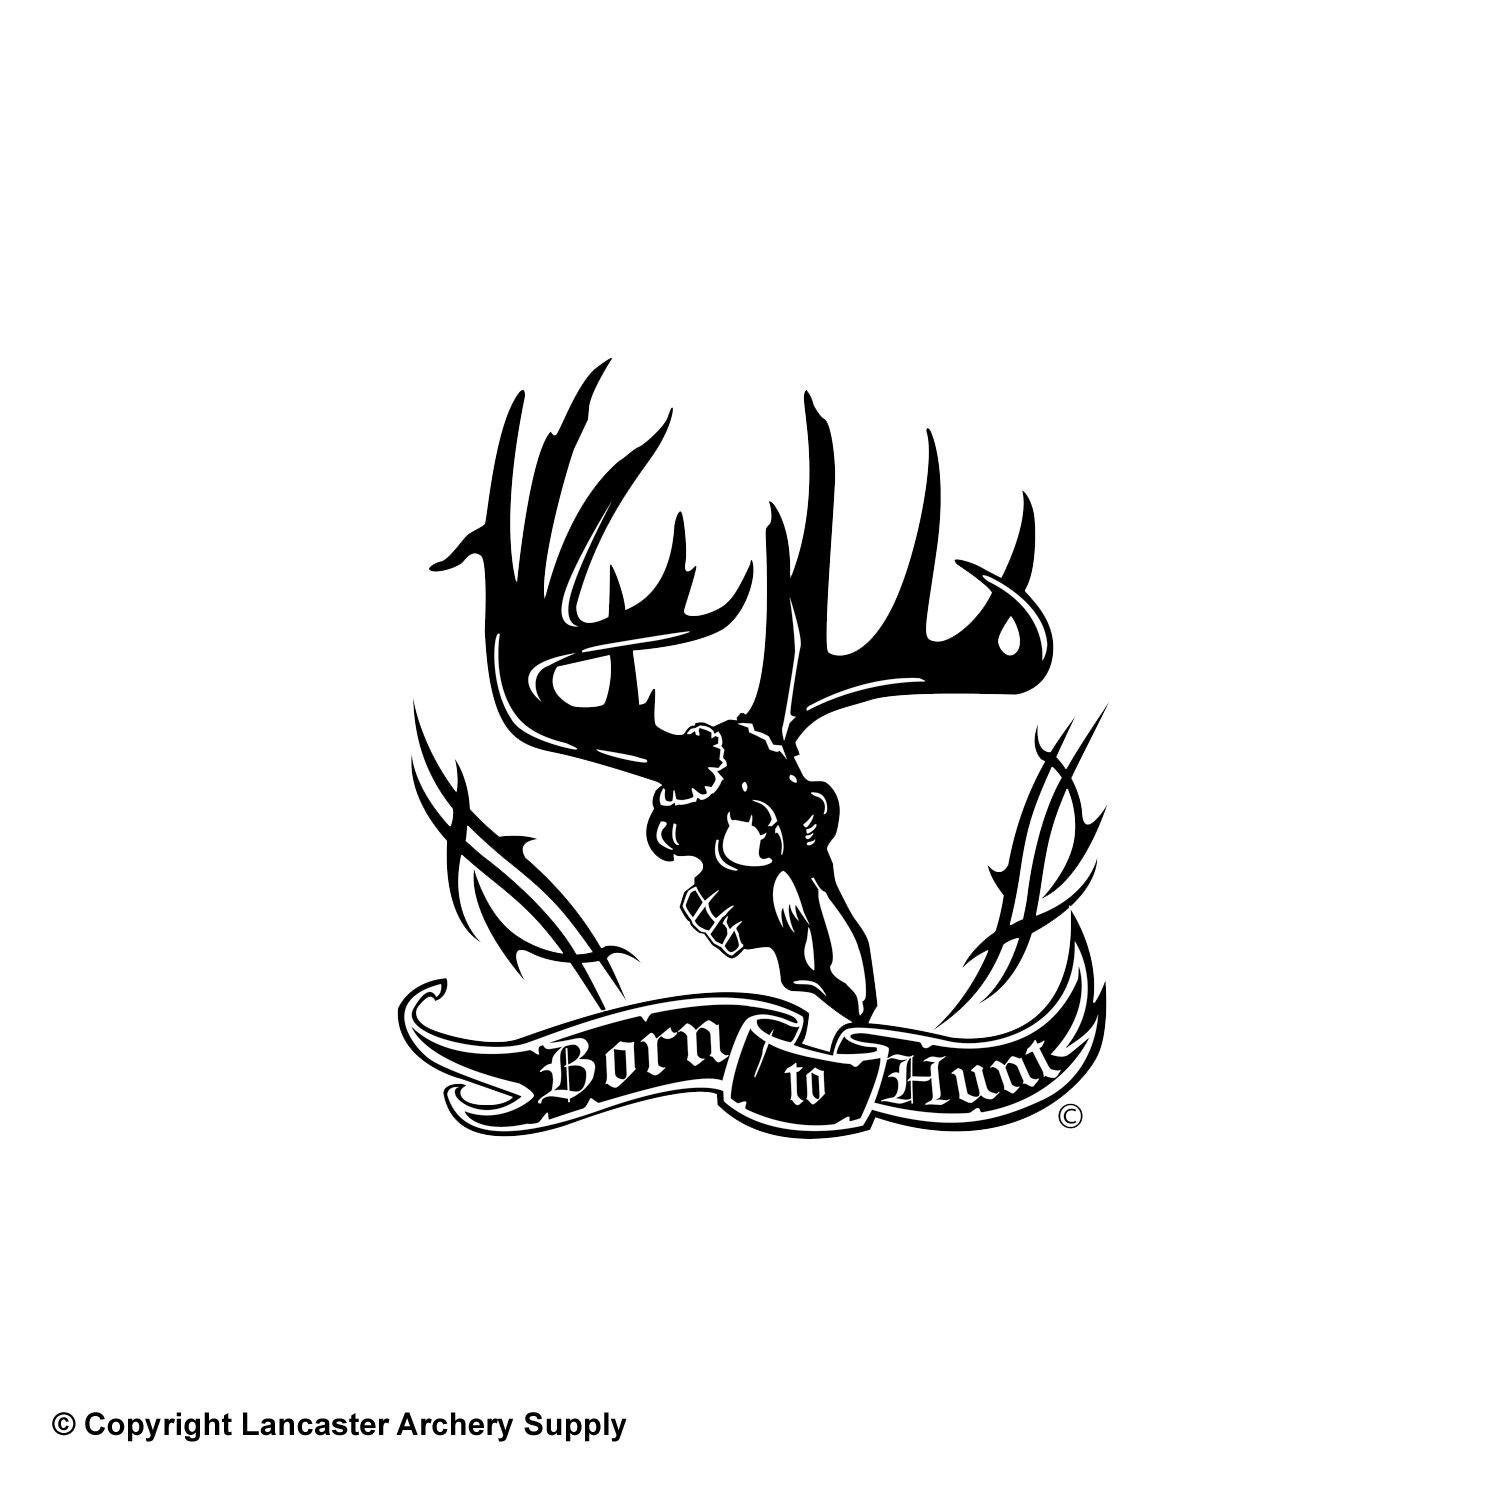 Hunting Clothing Company Logo - Outdoor Decals - Born to Hunt